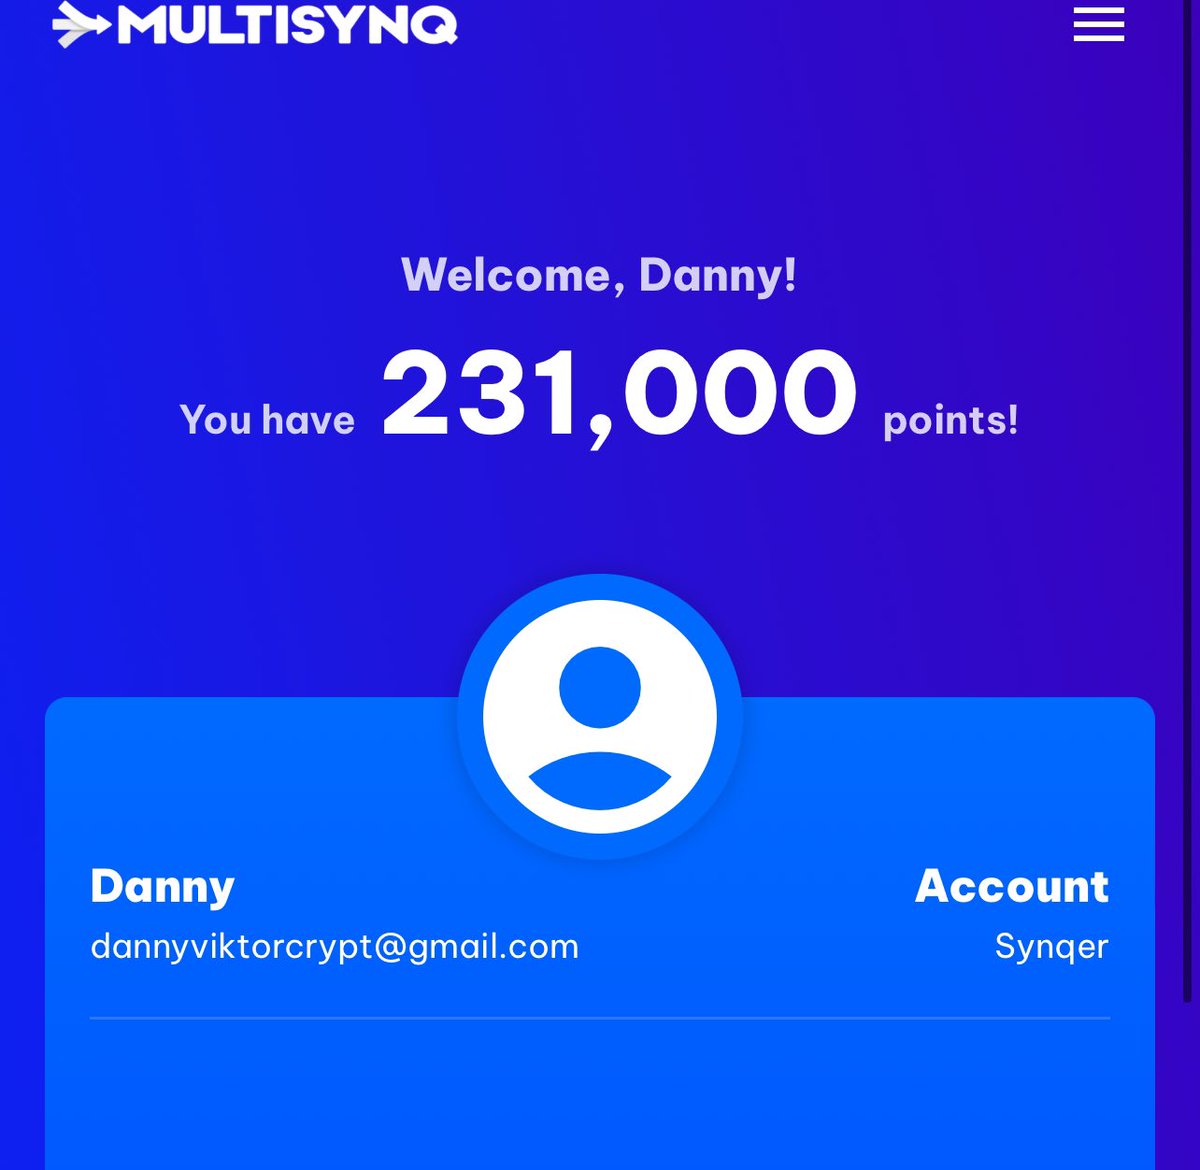 Are you still fading @multisynq?

Upon the launch of the Sync Utility Token in Q4 2024, MPs will be converted to MPX points at a 1:1 ratio. These MPX points can further be exchanged for various rewards.

Join now and get positioned- multisynq.io/auth?referral=…

Drop your link 👇